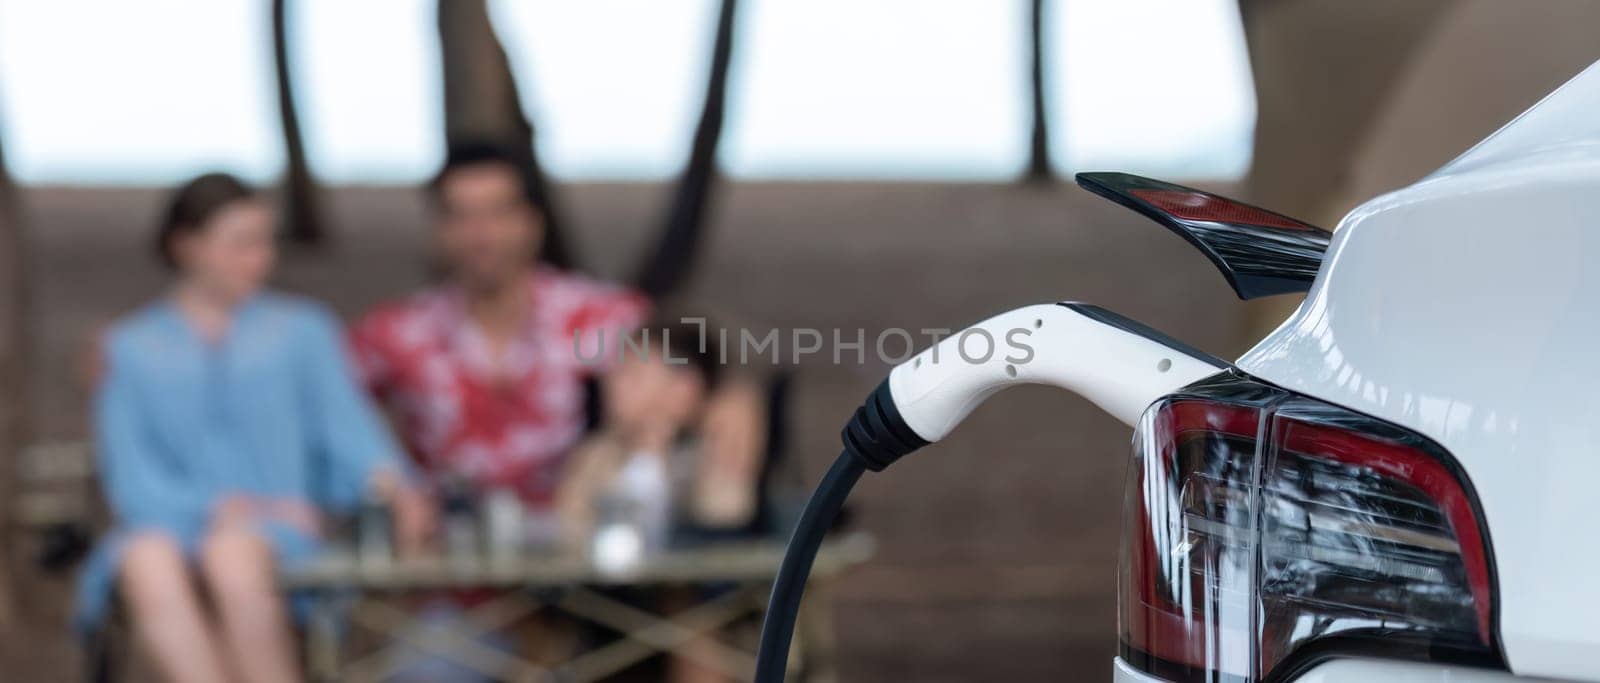 EV car charging with blurred family enjoying the seascape background. Perpetual by biancoblue